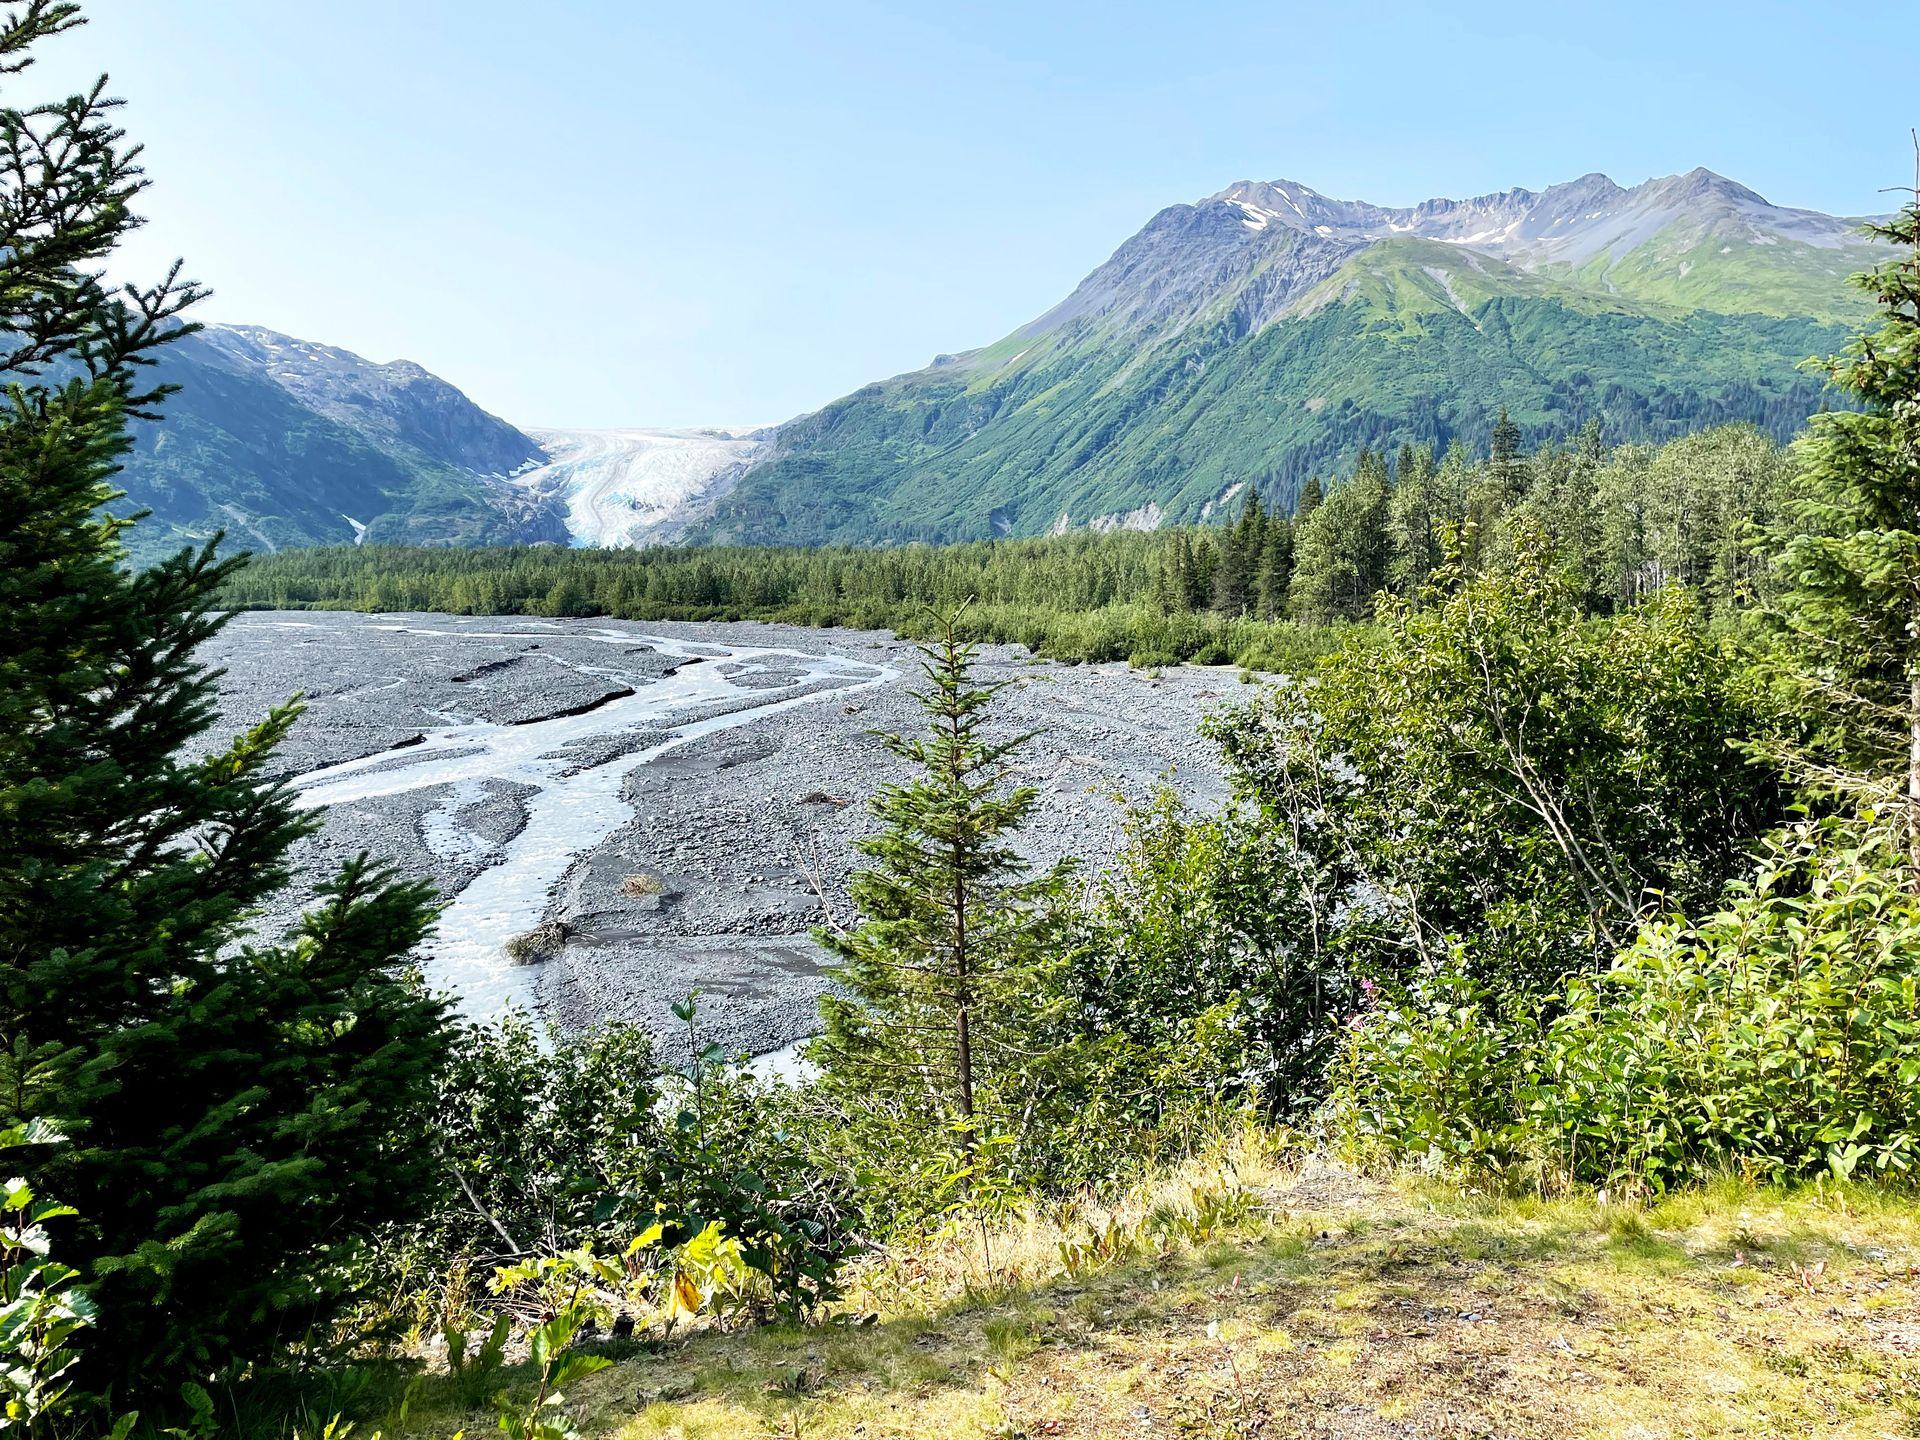 A view of a wash and Exit Glacier in the distance at Kenai Fjords National Park.